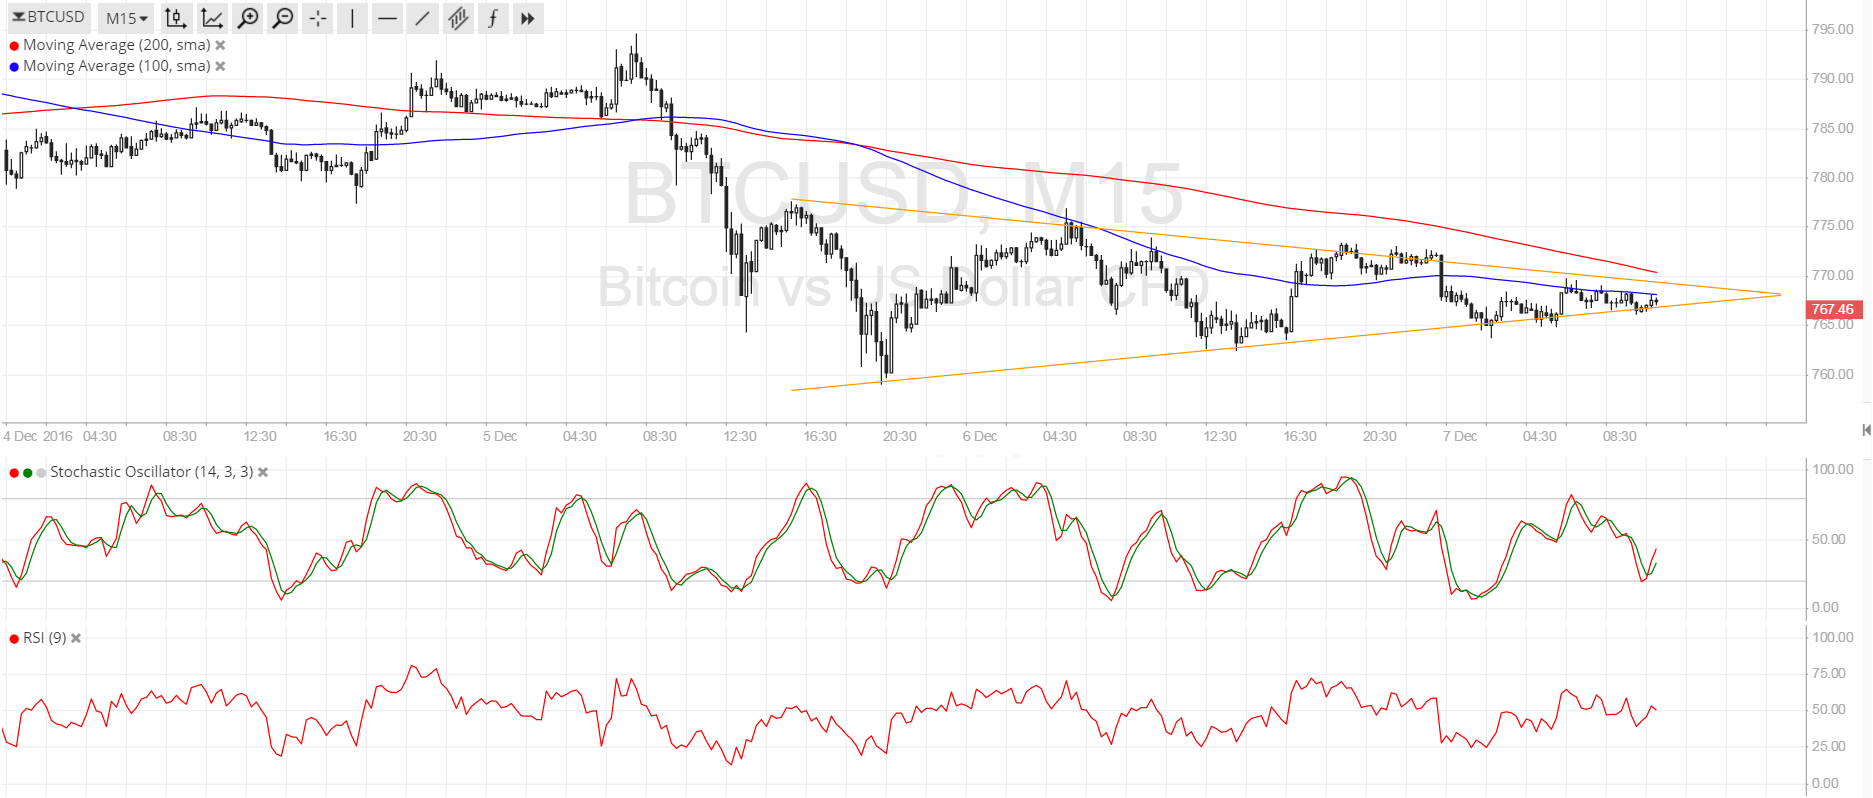 Bitcoin Price Technical Analysis for 12/07/2016 - Short-Term Consolidation Breakout